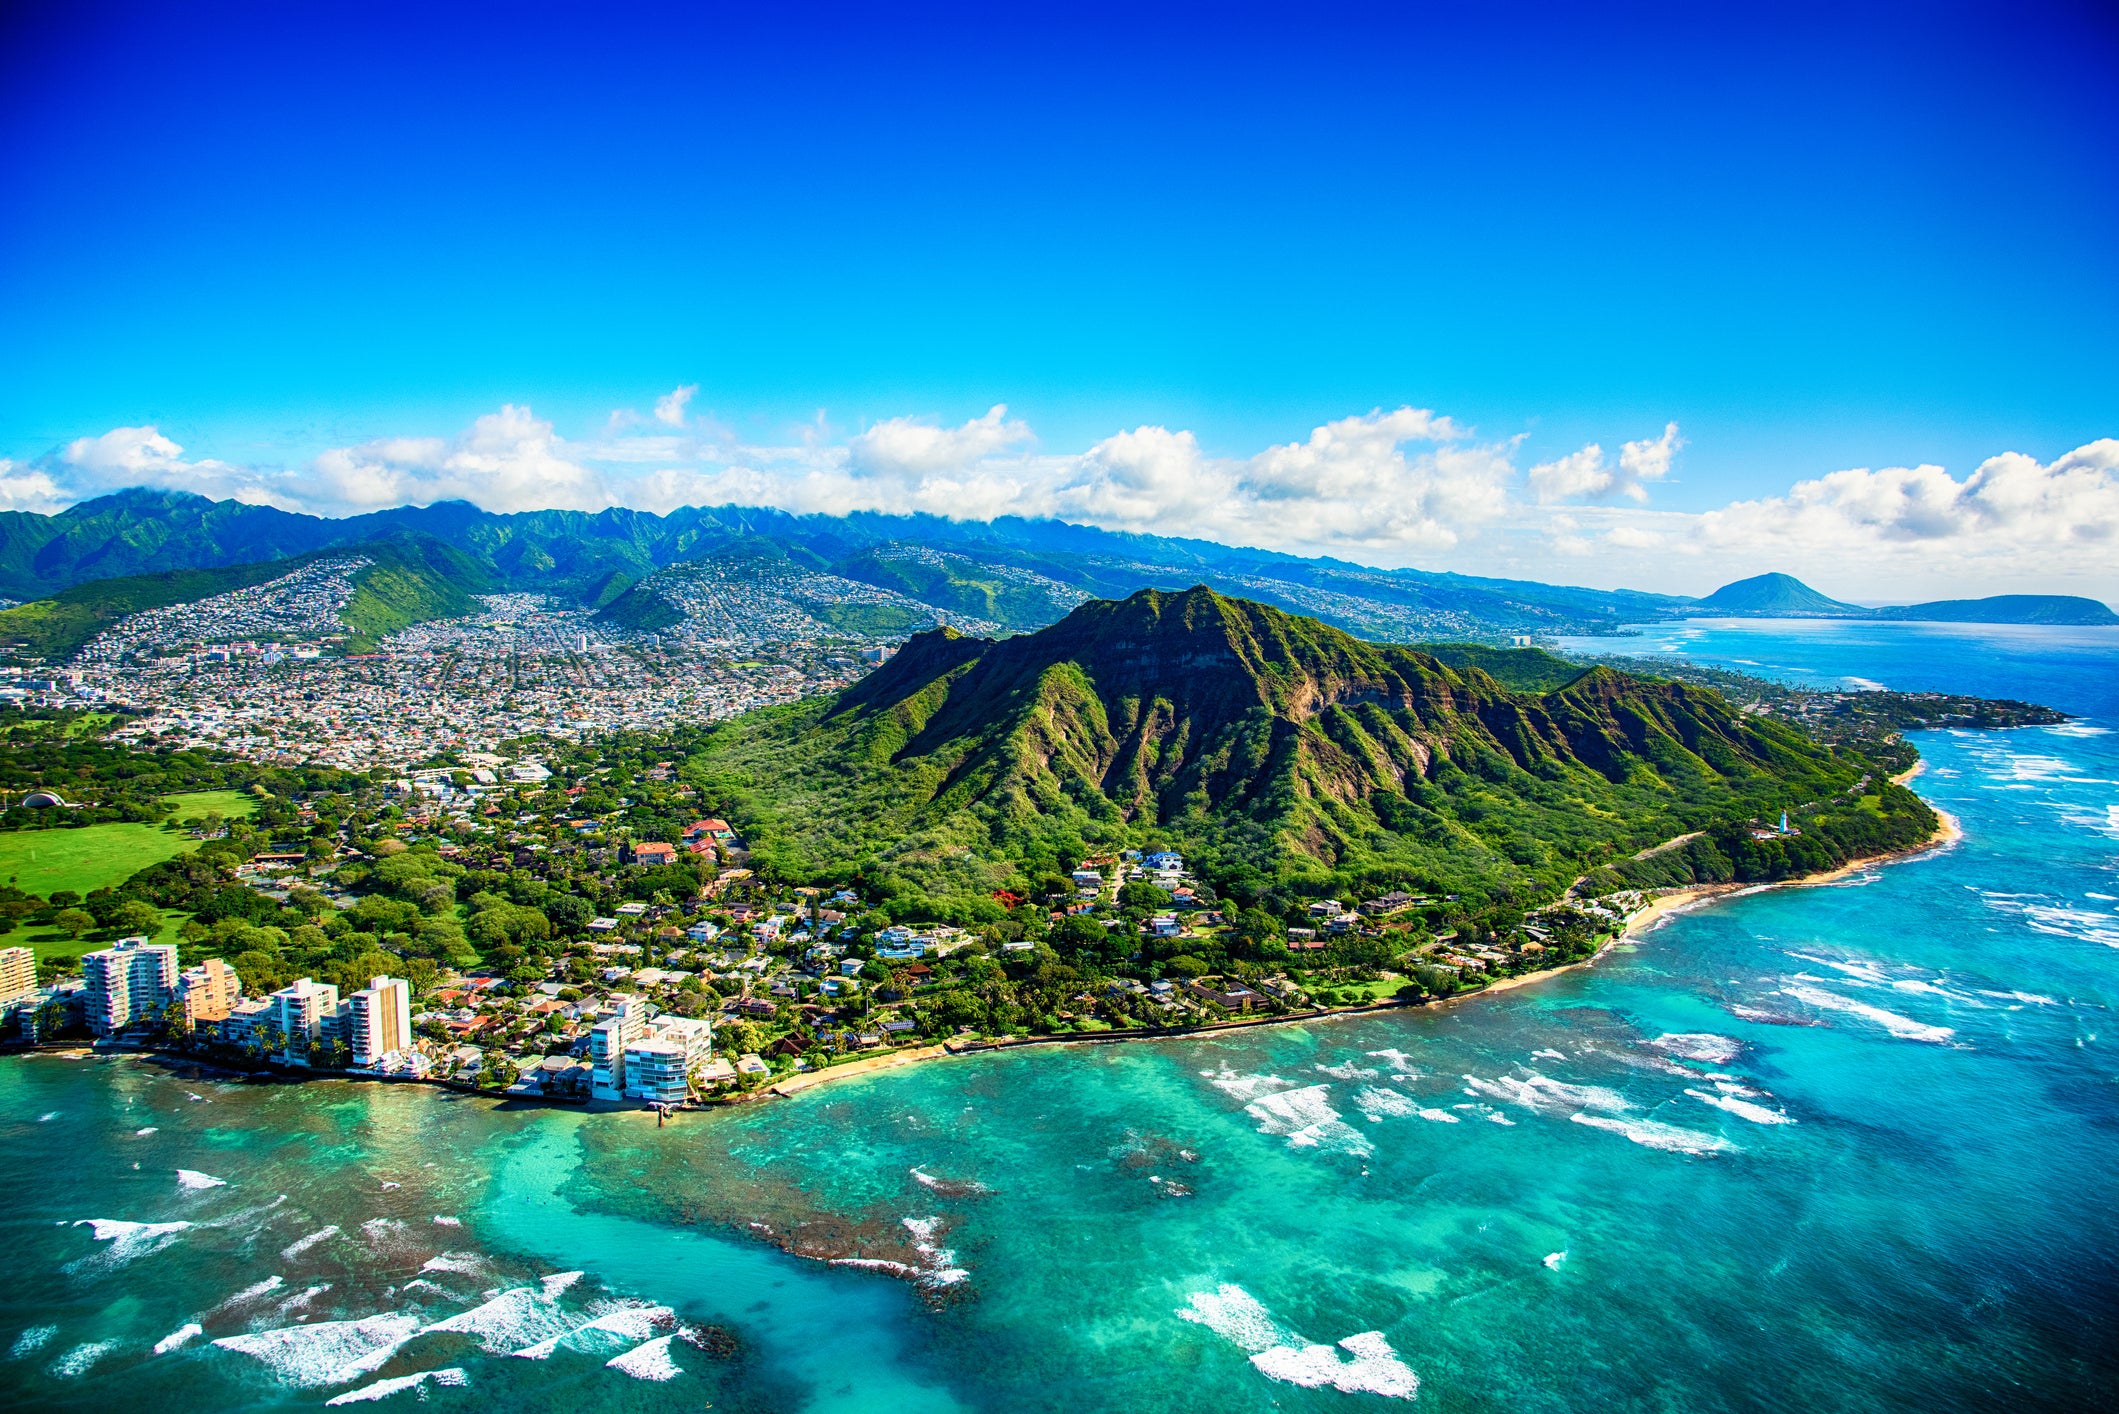 Hawaii requires vaccine proof from travellers to avoid quarantine